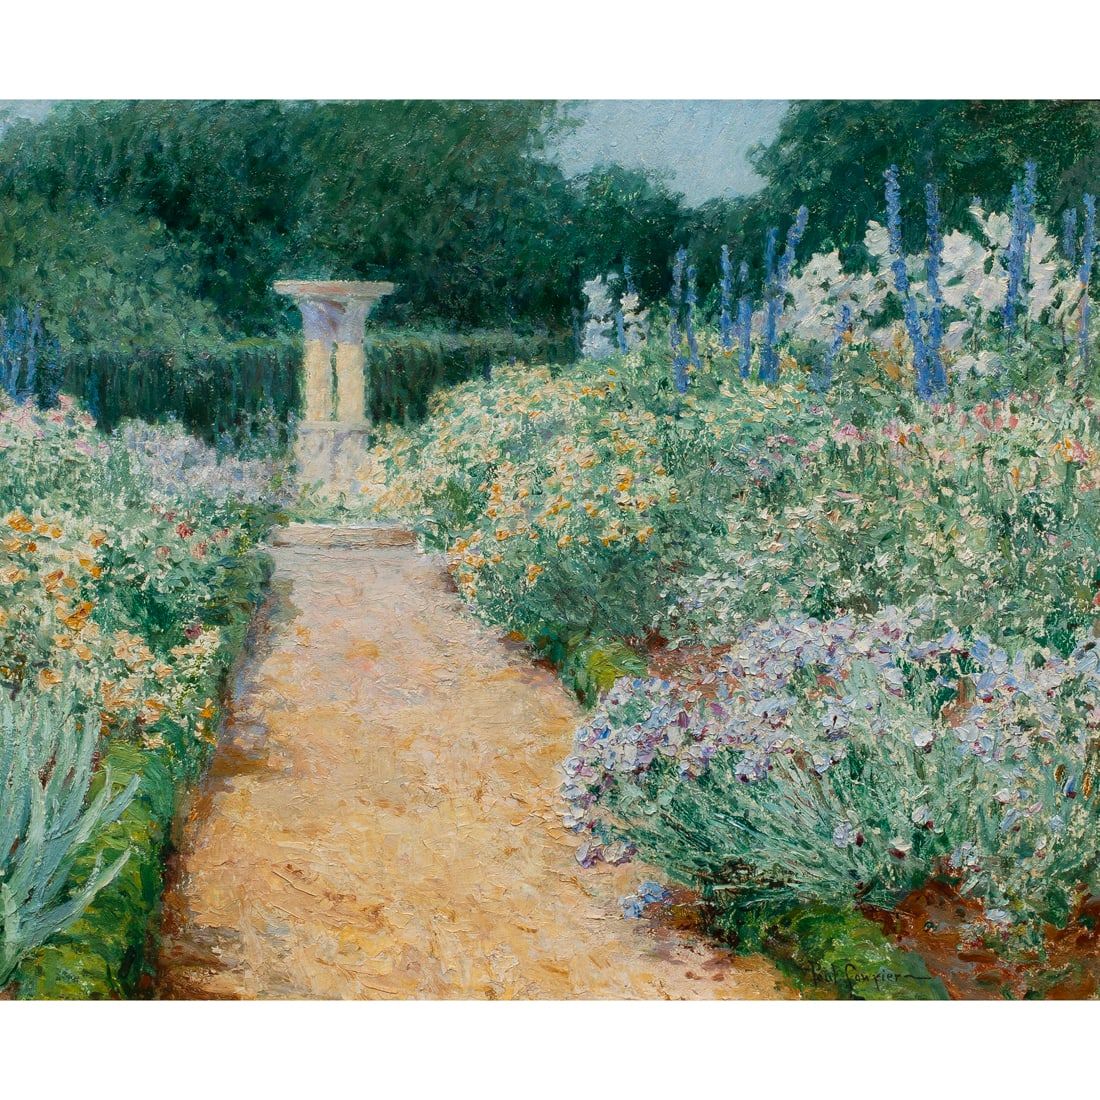 Paul Sawyier, ‘Garden with Fountain’, which hammered for $37,000 and sold for $49,125 with buyer’s premium at Clars Auction Gallery.